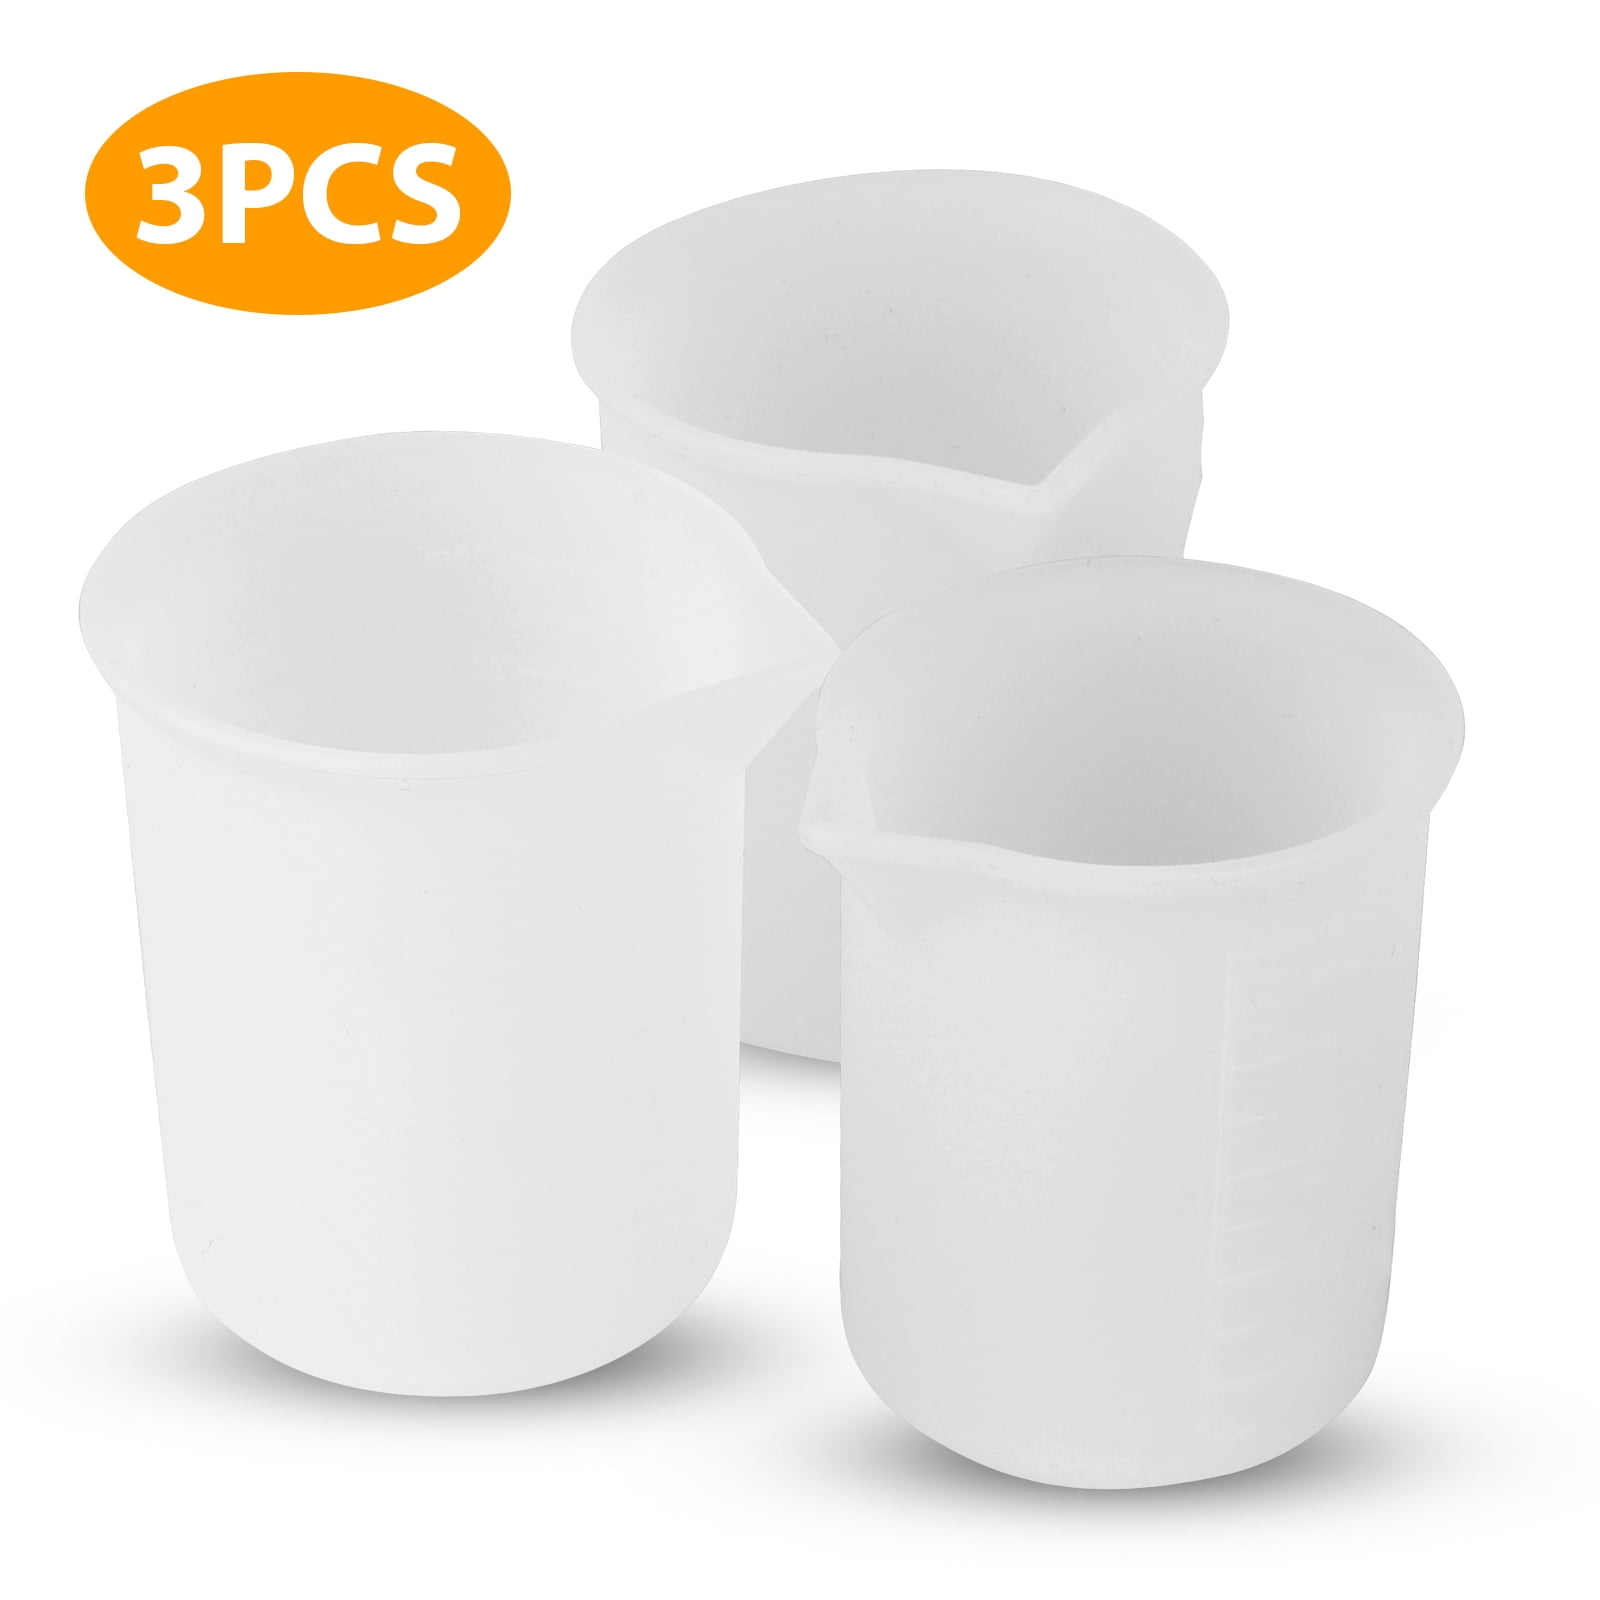 6PCS Silicone Measuring Cup for Cooking Resin 3PCS 8OZ + 3PCS 16OZ Melting  Cups with Marking, Squeeze and Pour Flexible Measuring Cups for Mixing